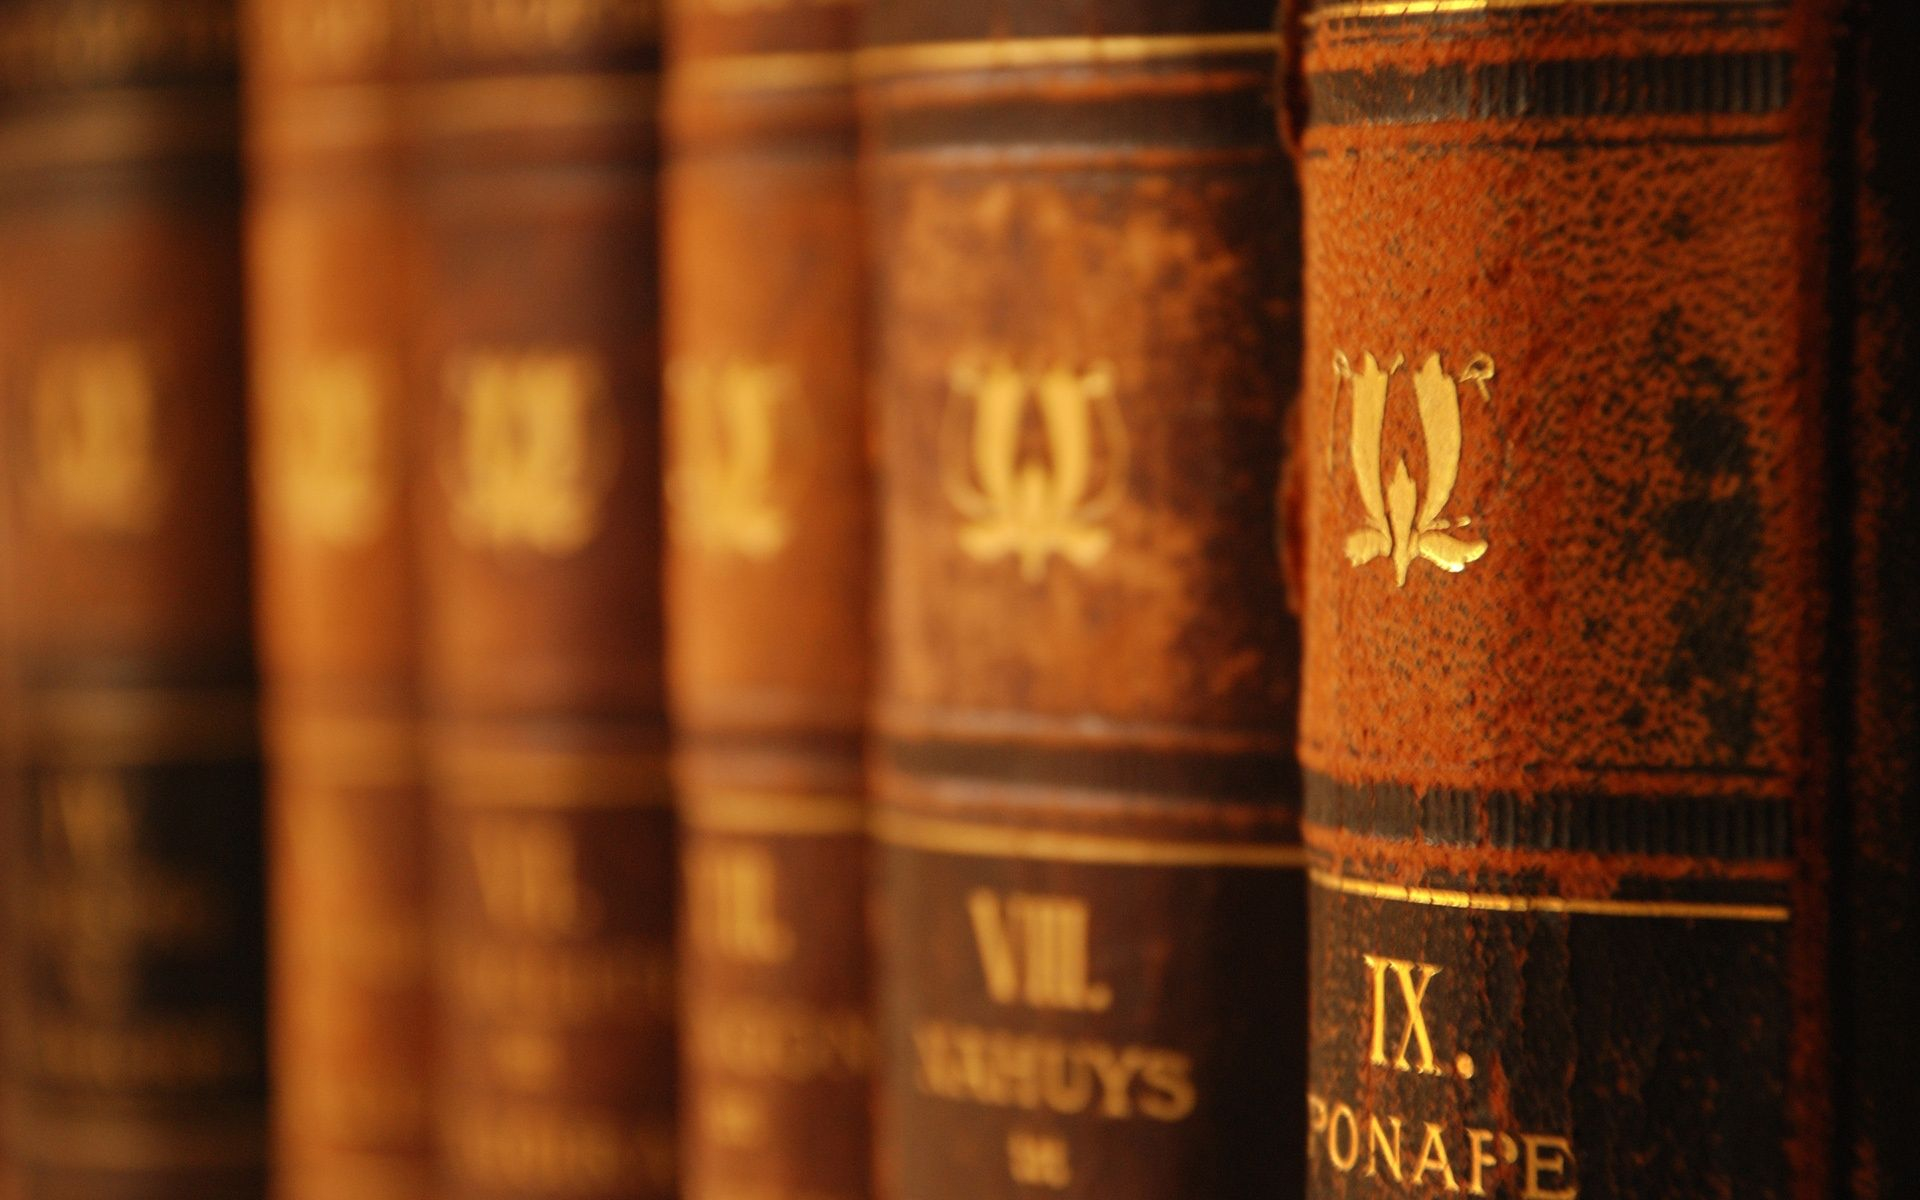 1920x1200 39 old books wide hd wallpaper download old book images free 202 :: Old Book Desktop Wallpapers